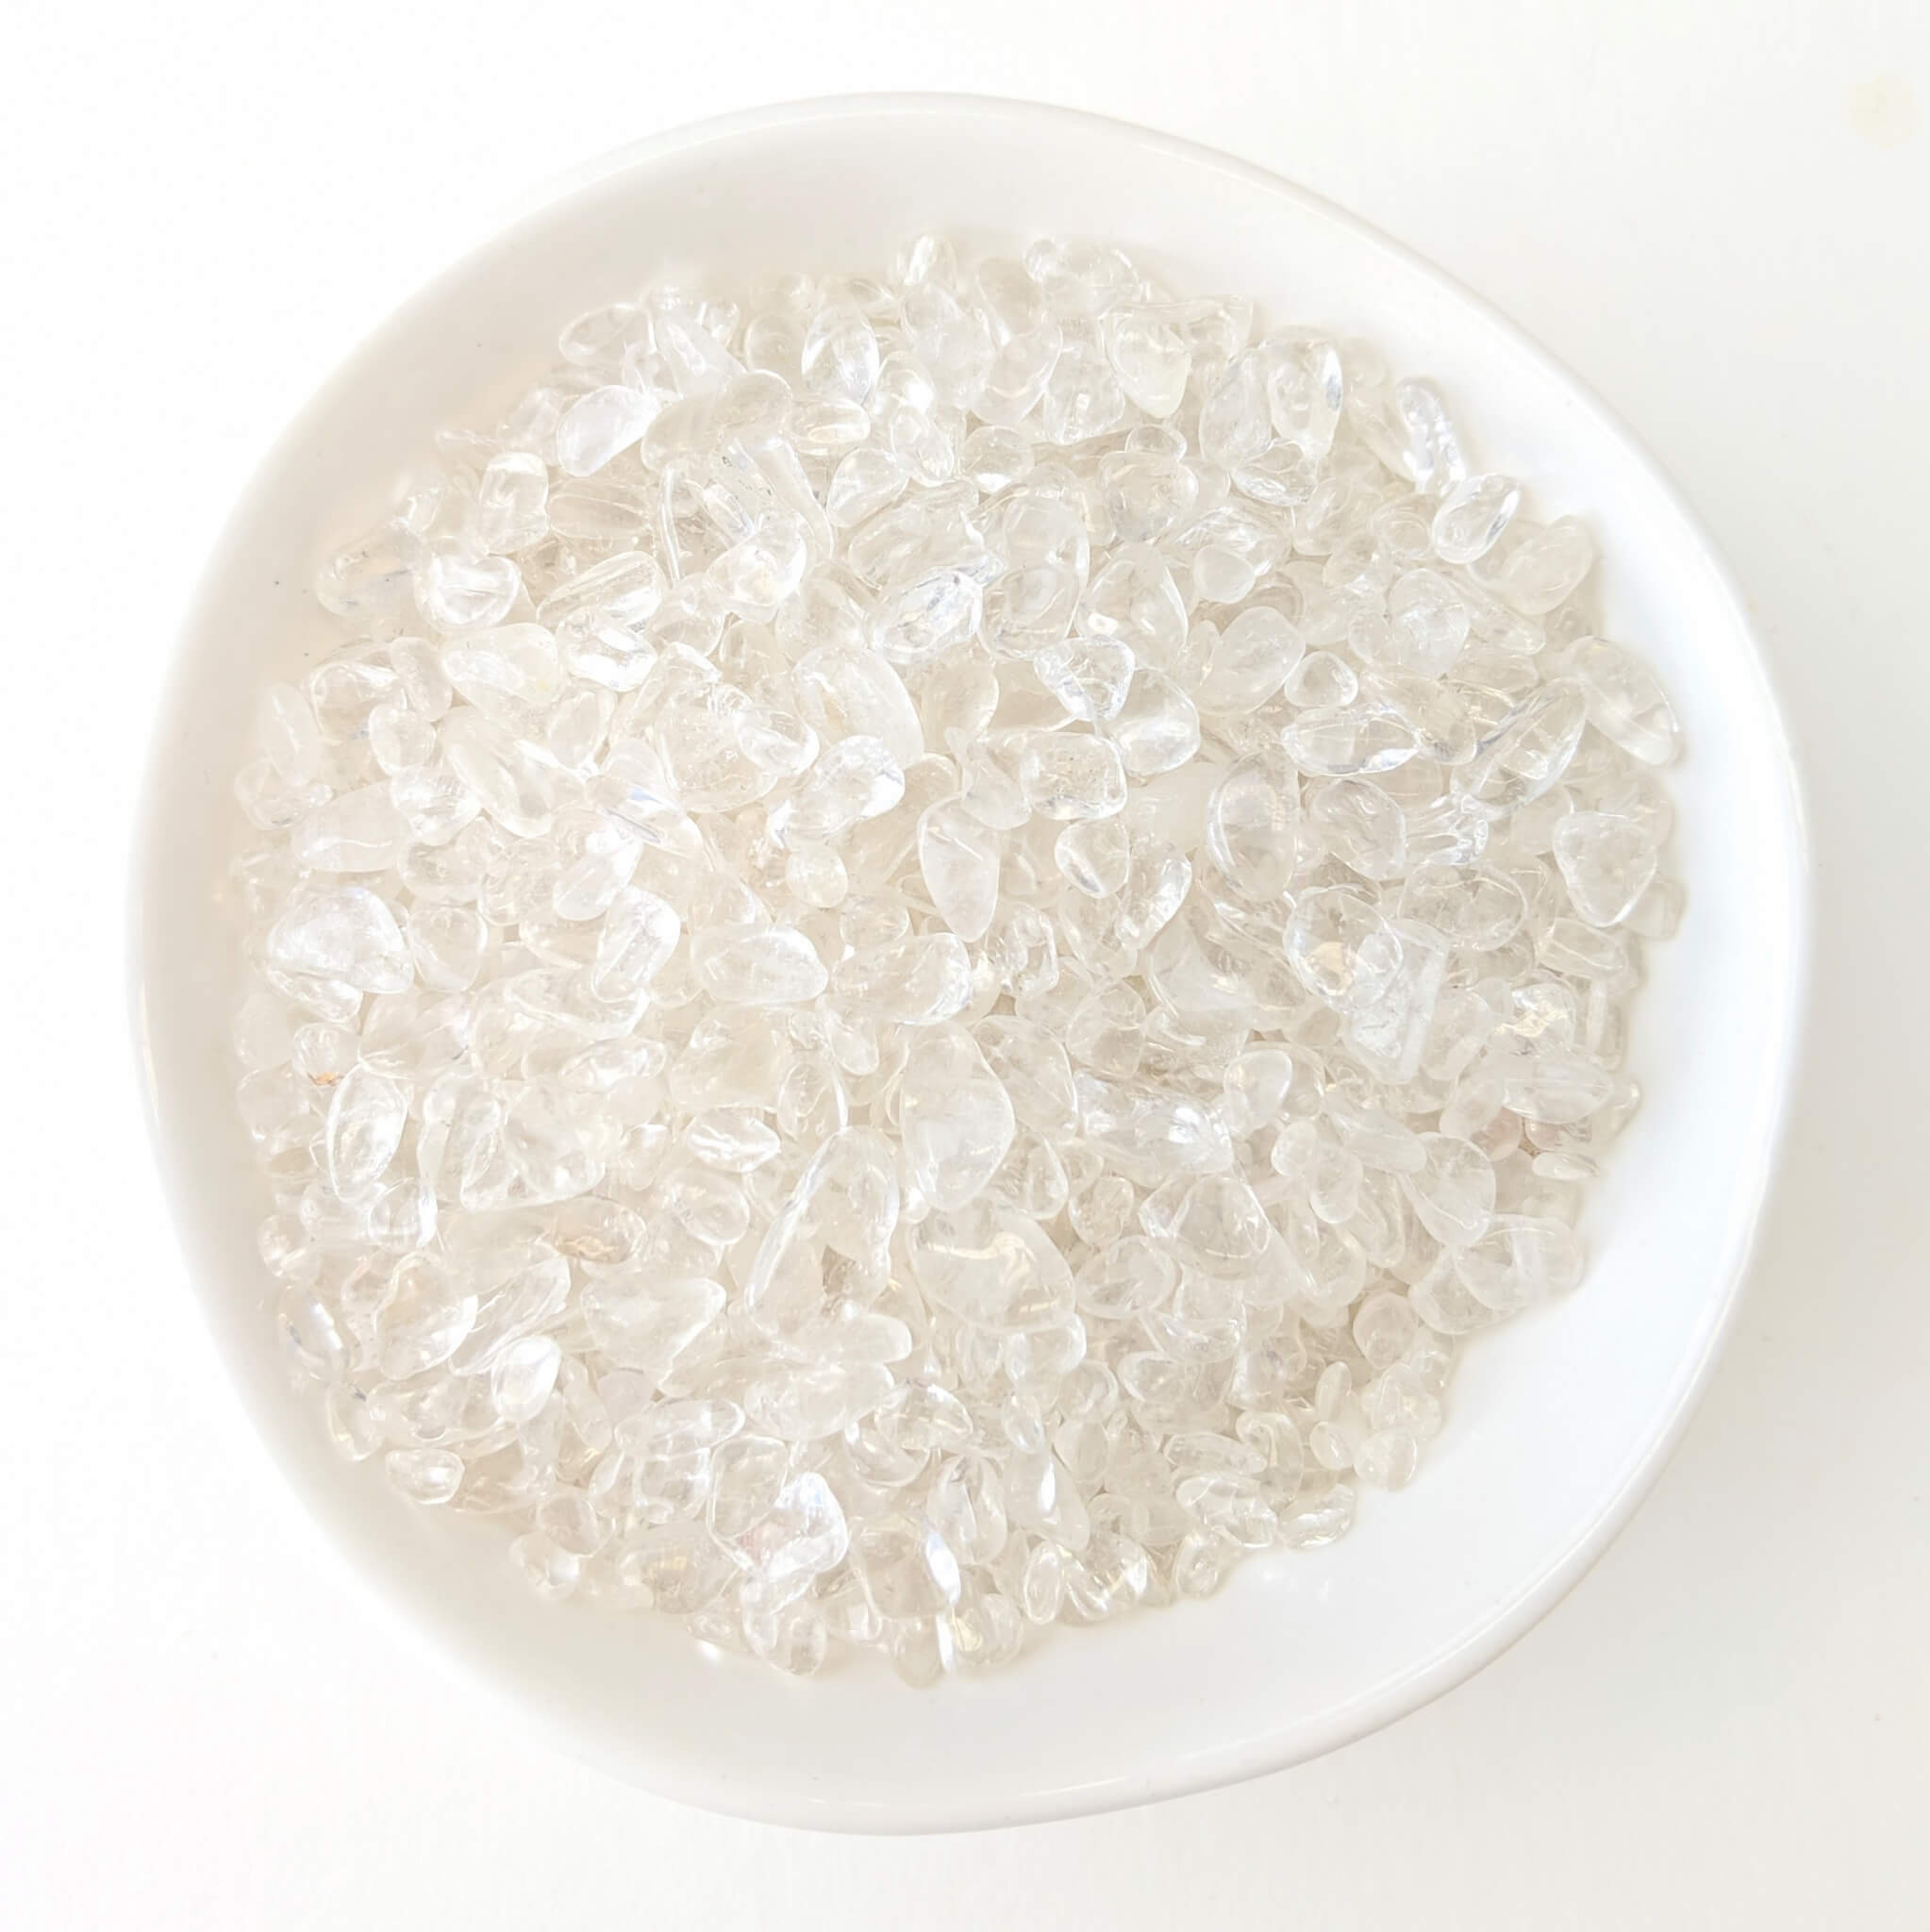 Clear Quartz Crystal Chips in a White Bowl Top View